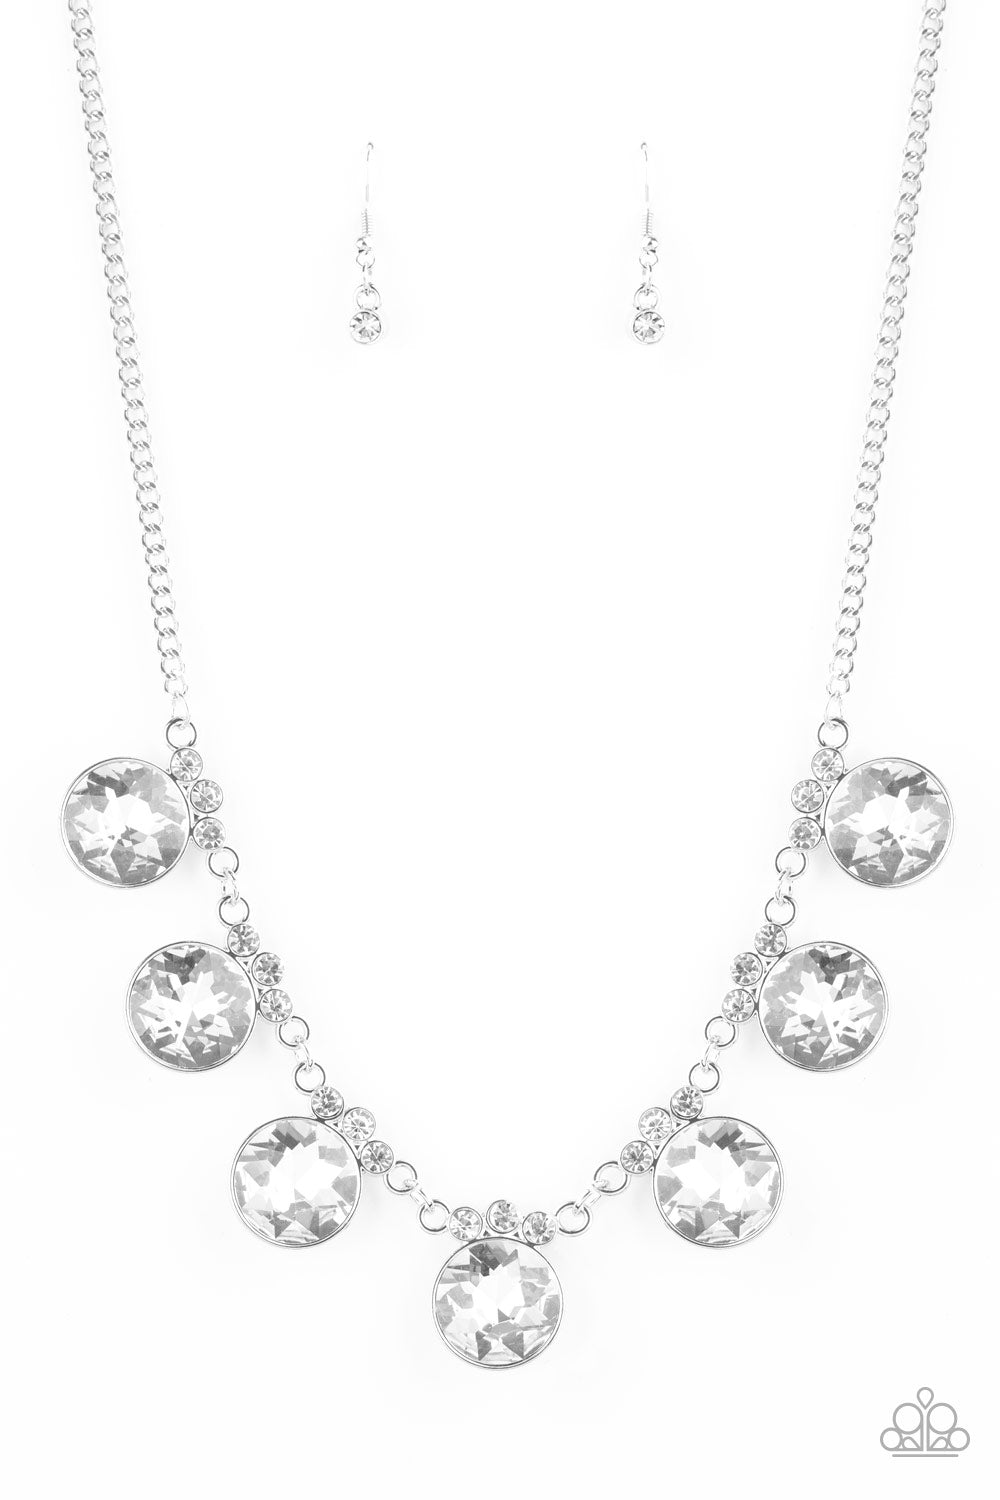 Paparazzi Accessories - GLOW-Getter Glamour - White Necklace - Alies Bling Bar